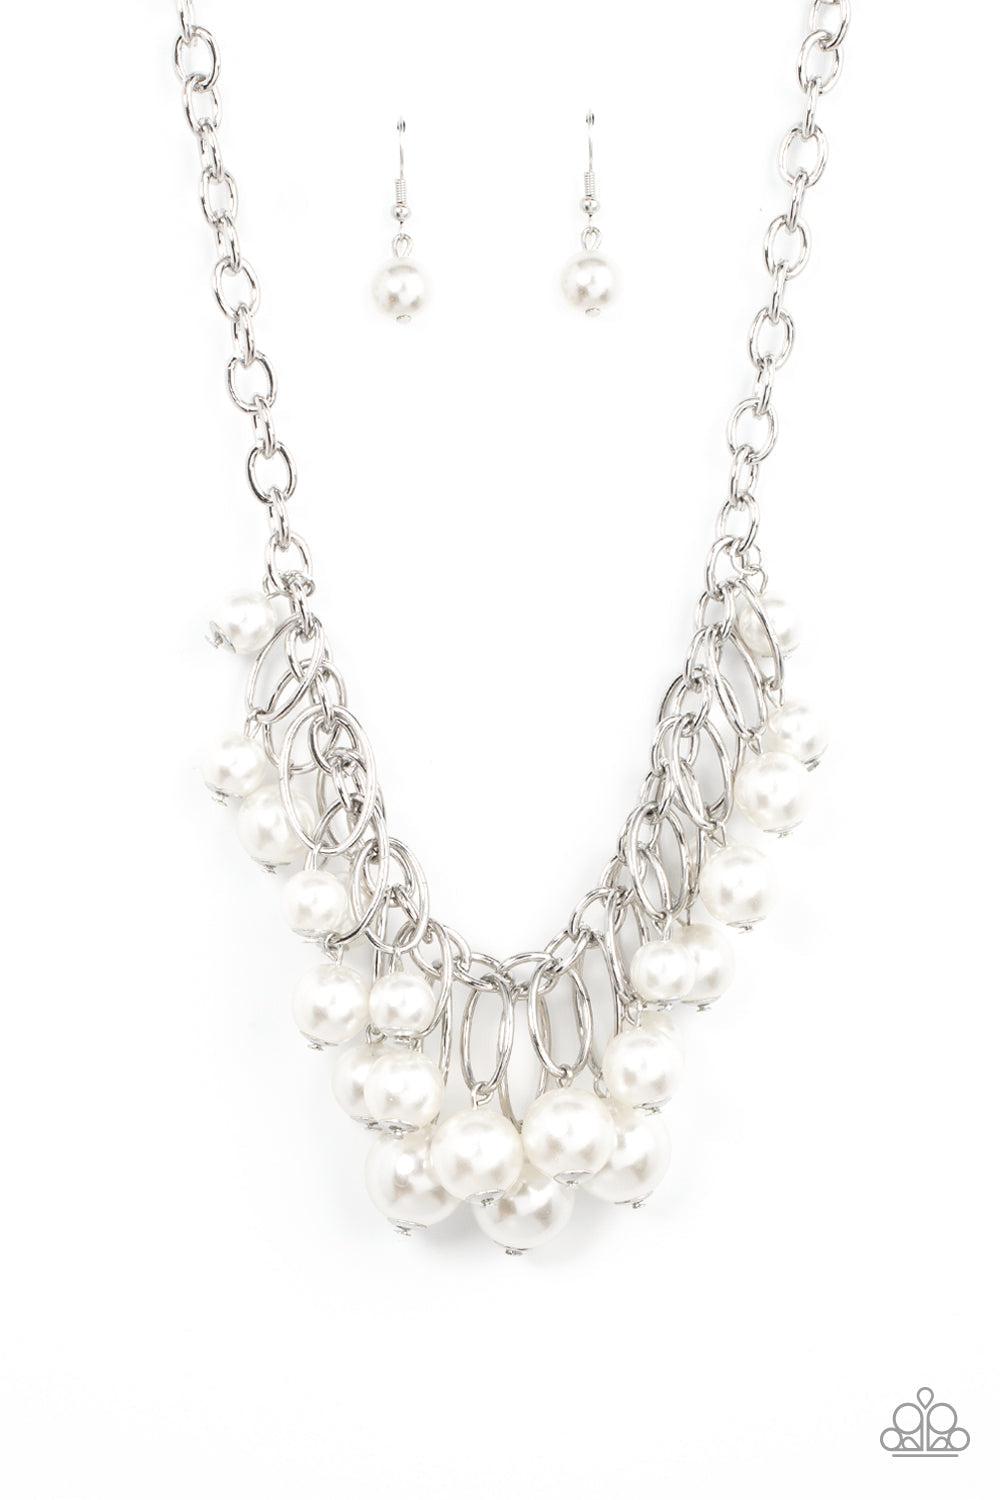 Powerhouse Pose White Pearl Necklace - Paparazzi Accessories- lightbox - CarasShop.com - $5 Jewelry by Cara Jewels